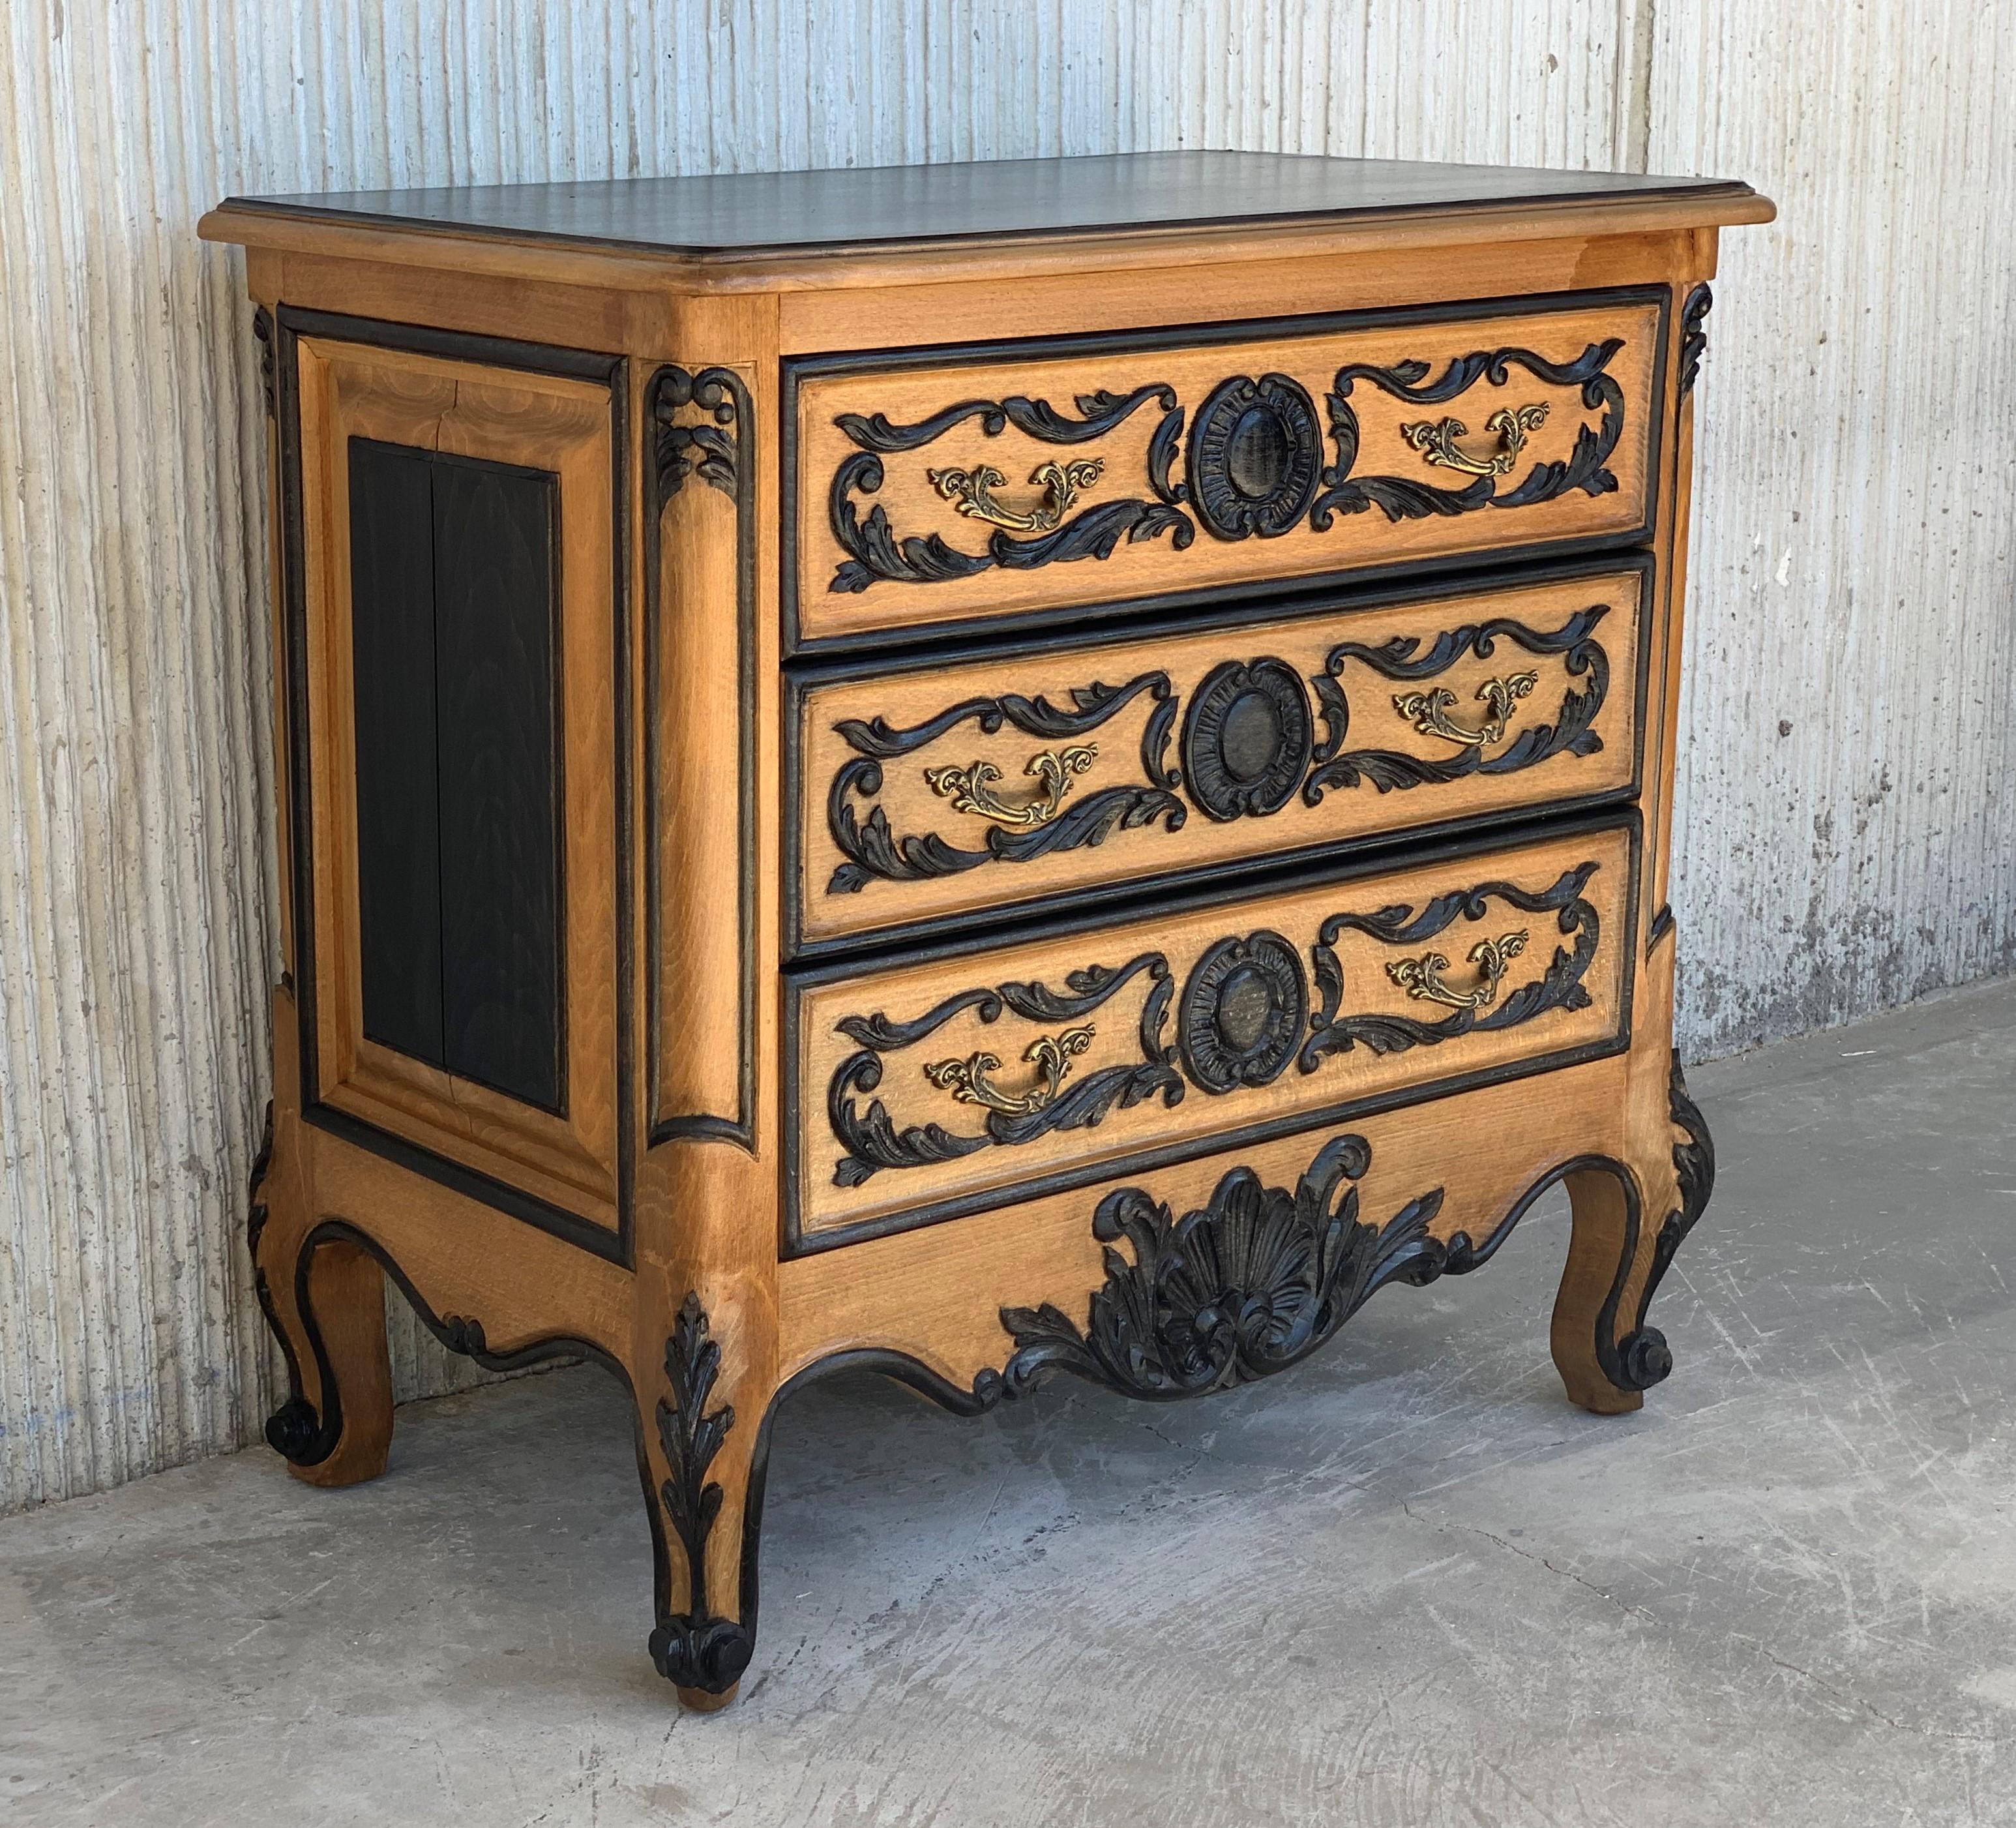 20th century country French Louis XVI pine commode is a lovely late period piece, completely crafted and carved by hand. Pairs of gorgeous floral garlands appear flanking the centre fluted motif surrounding the handles. Tailored architecture ensures